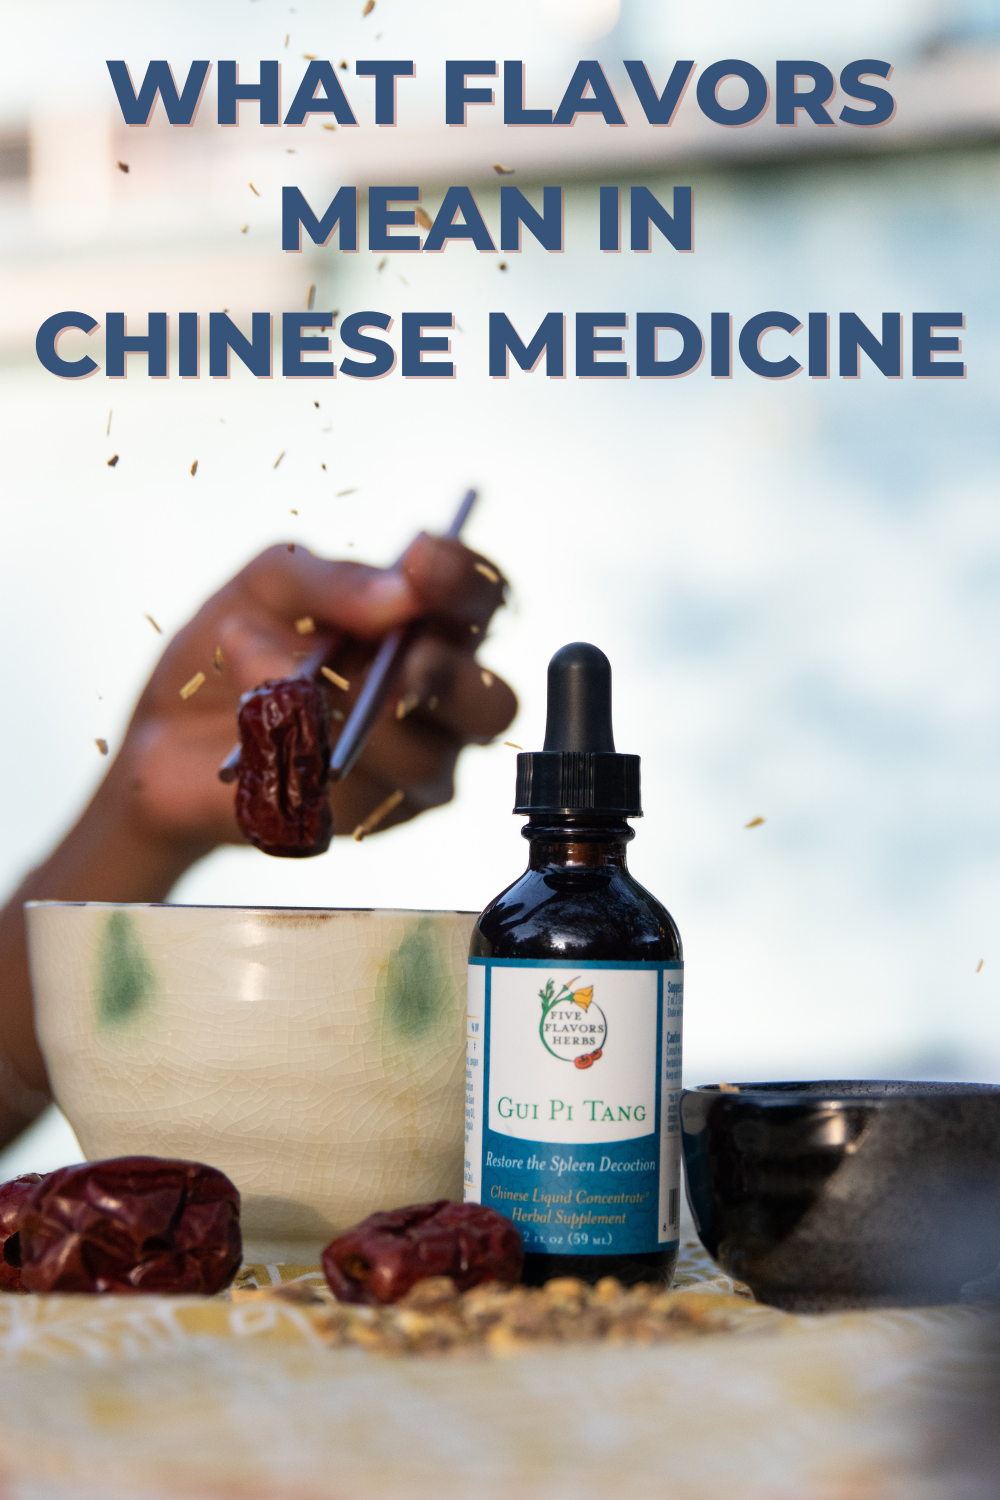 What Flavors Mean in Chinese Medicine